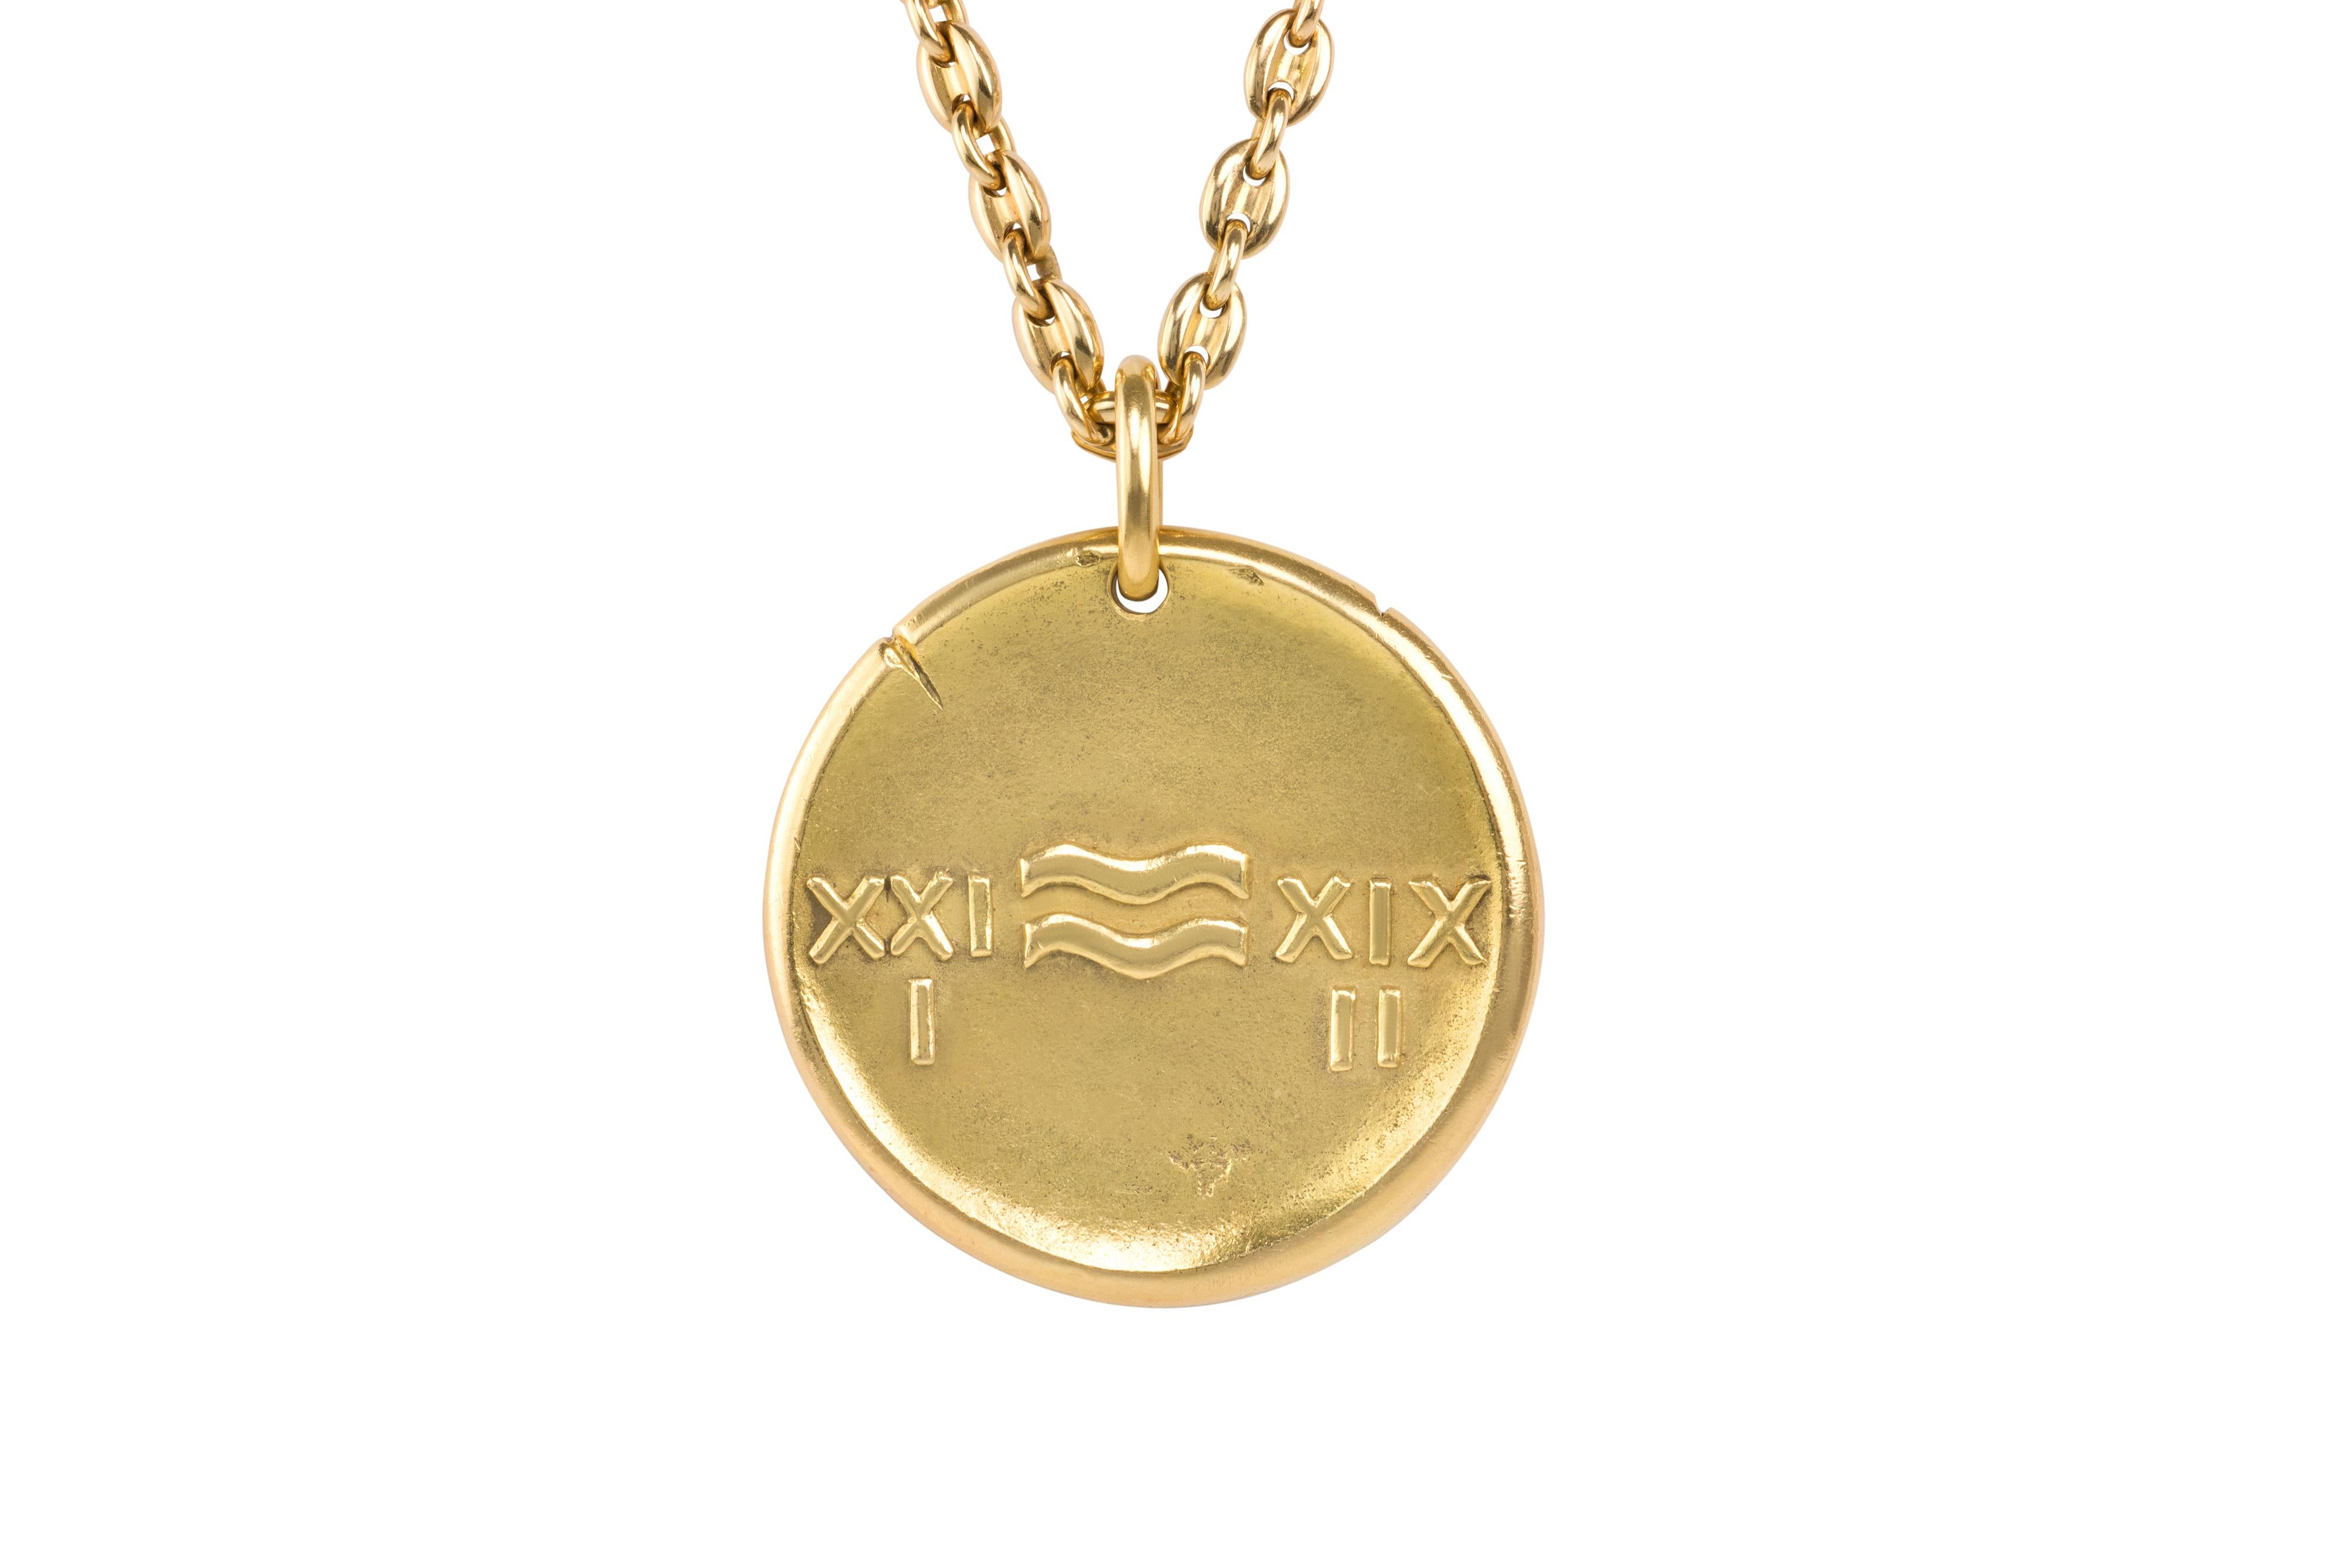 An 18 karat gold Aquarius zodiac pendant, by Georges Lenfant, c. 1970. 

The pendant is stamped with maker's mark for Georges Lenfant and French hallmarks. This pendant is identical to the version made by Van Cleef & Arpels in the 1970s, which was